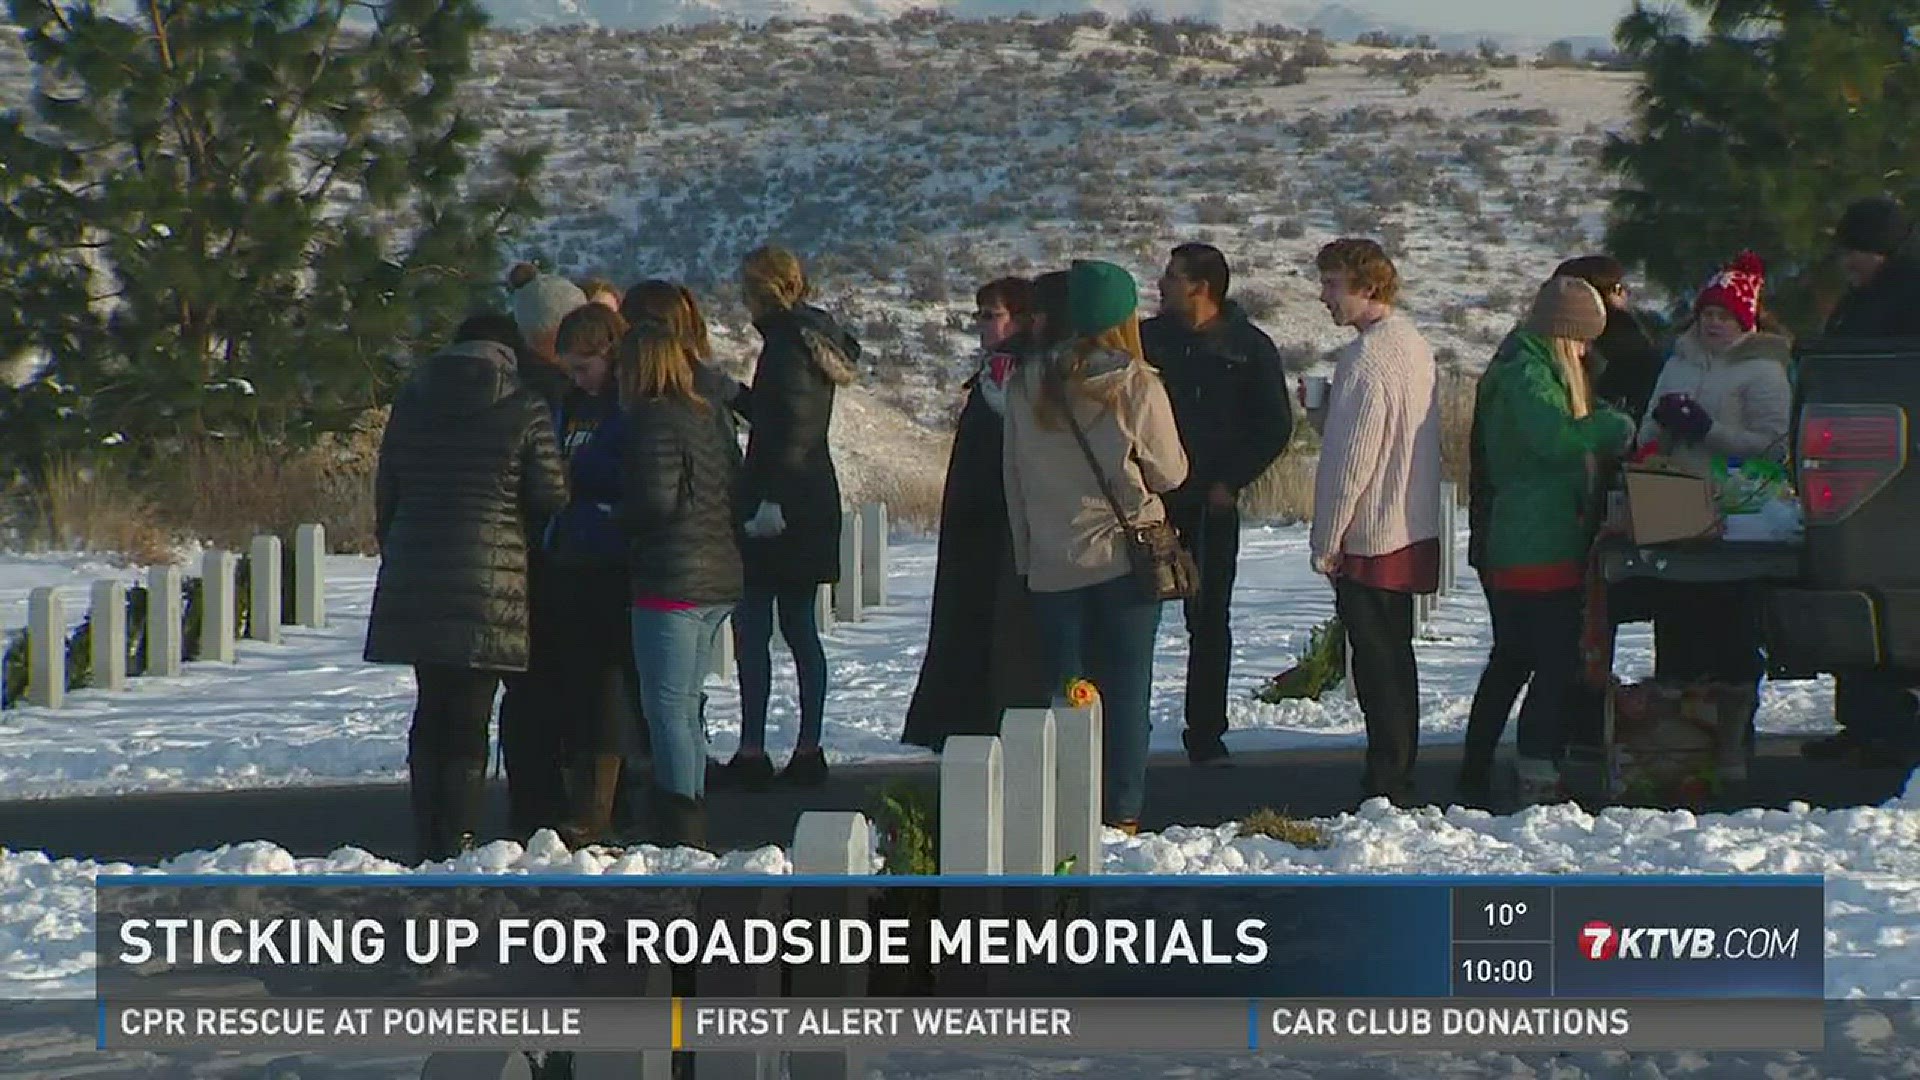 A recent news story focused on a crash survivor who spoke out against roadside memorials. One victim's family is sticking up for the symbols of love.